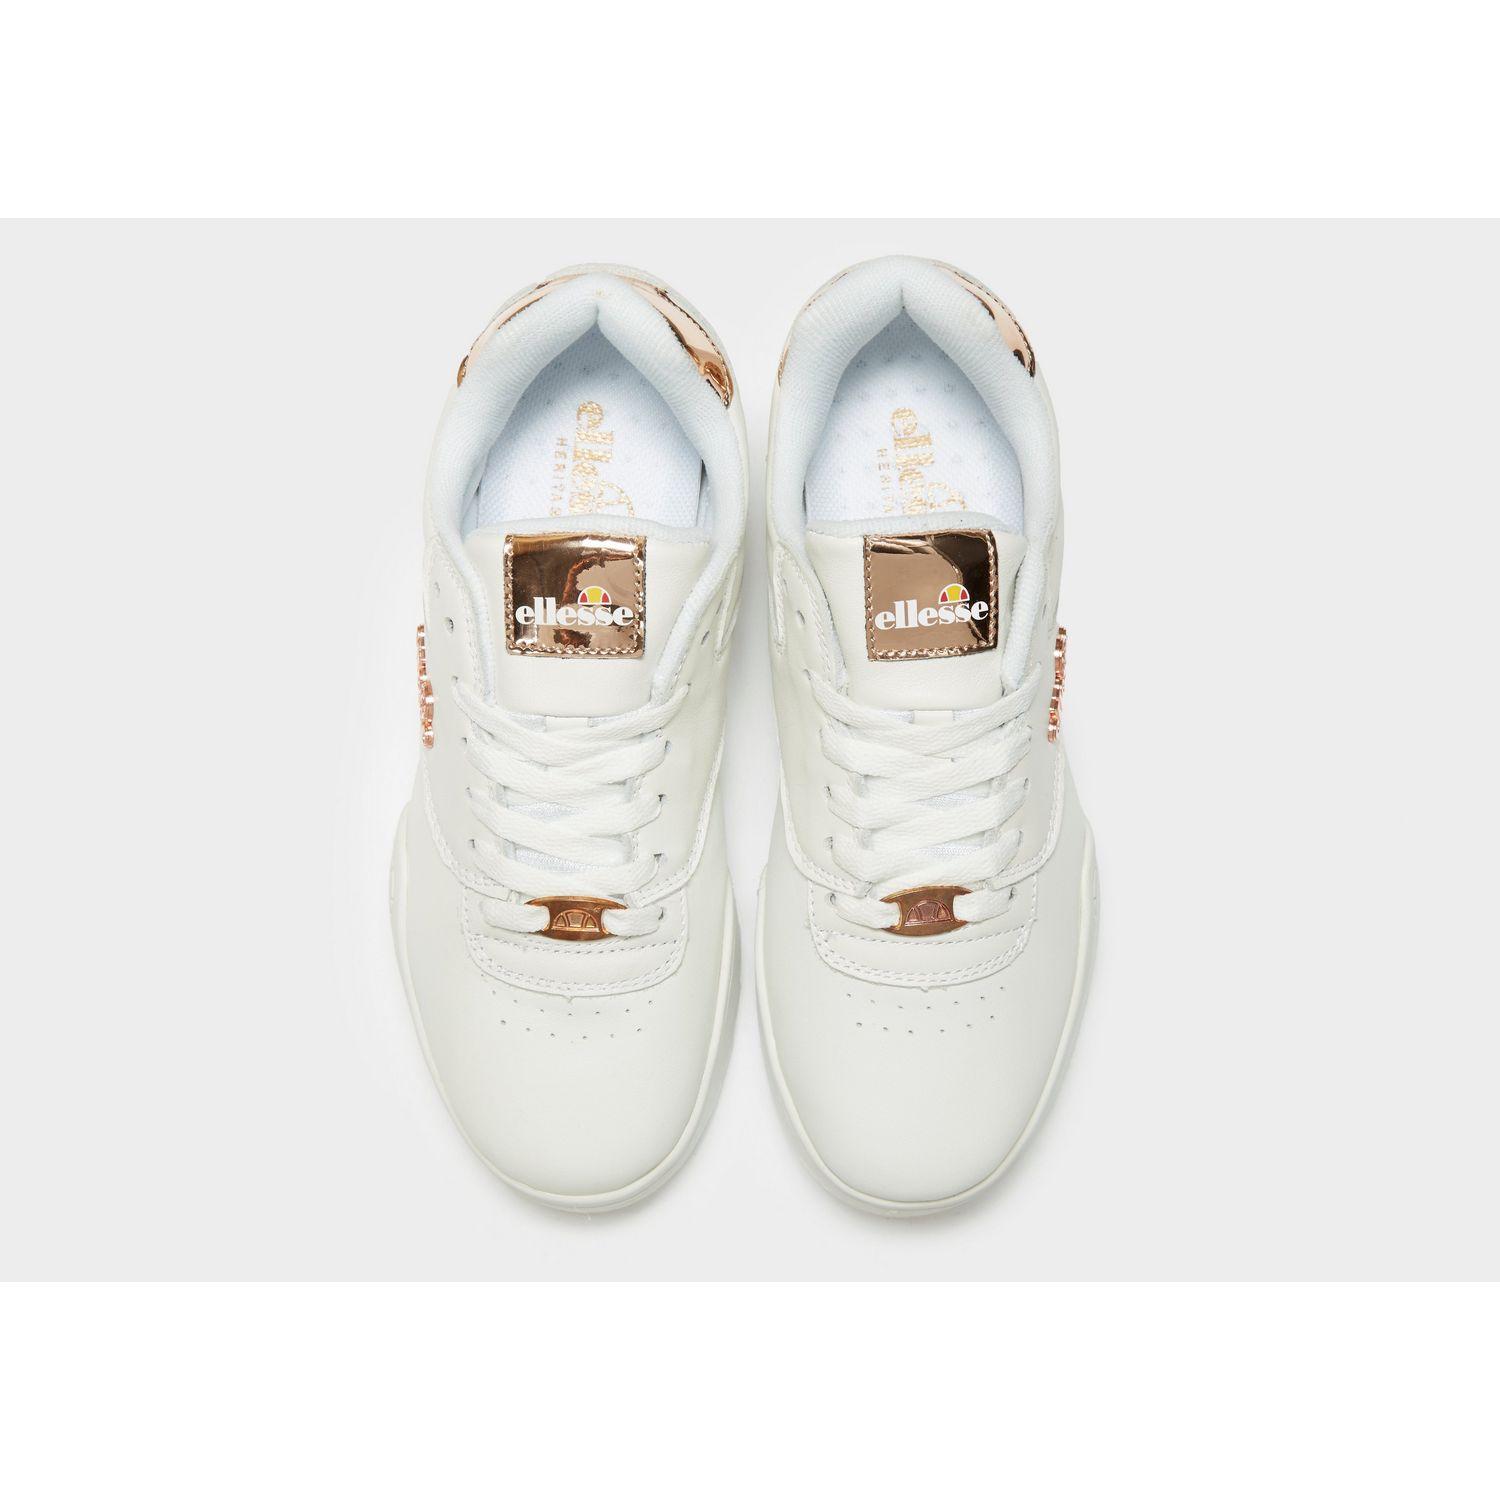 ellesse rose gold trainers